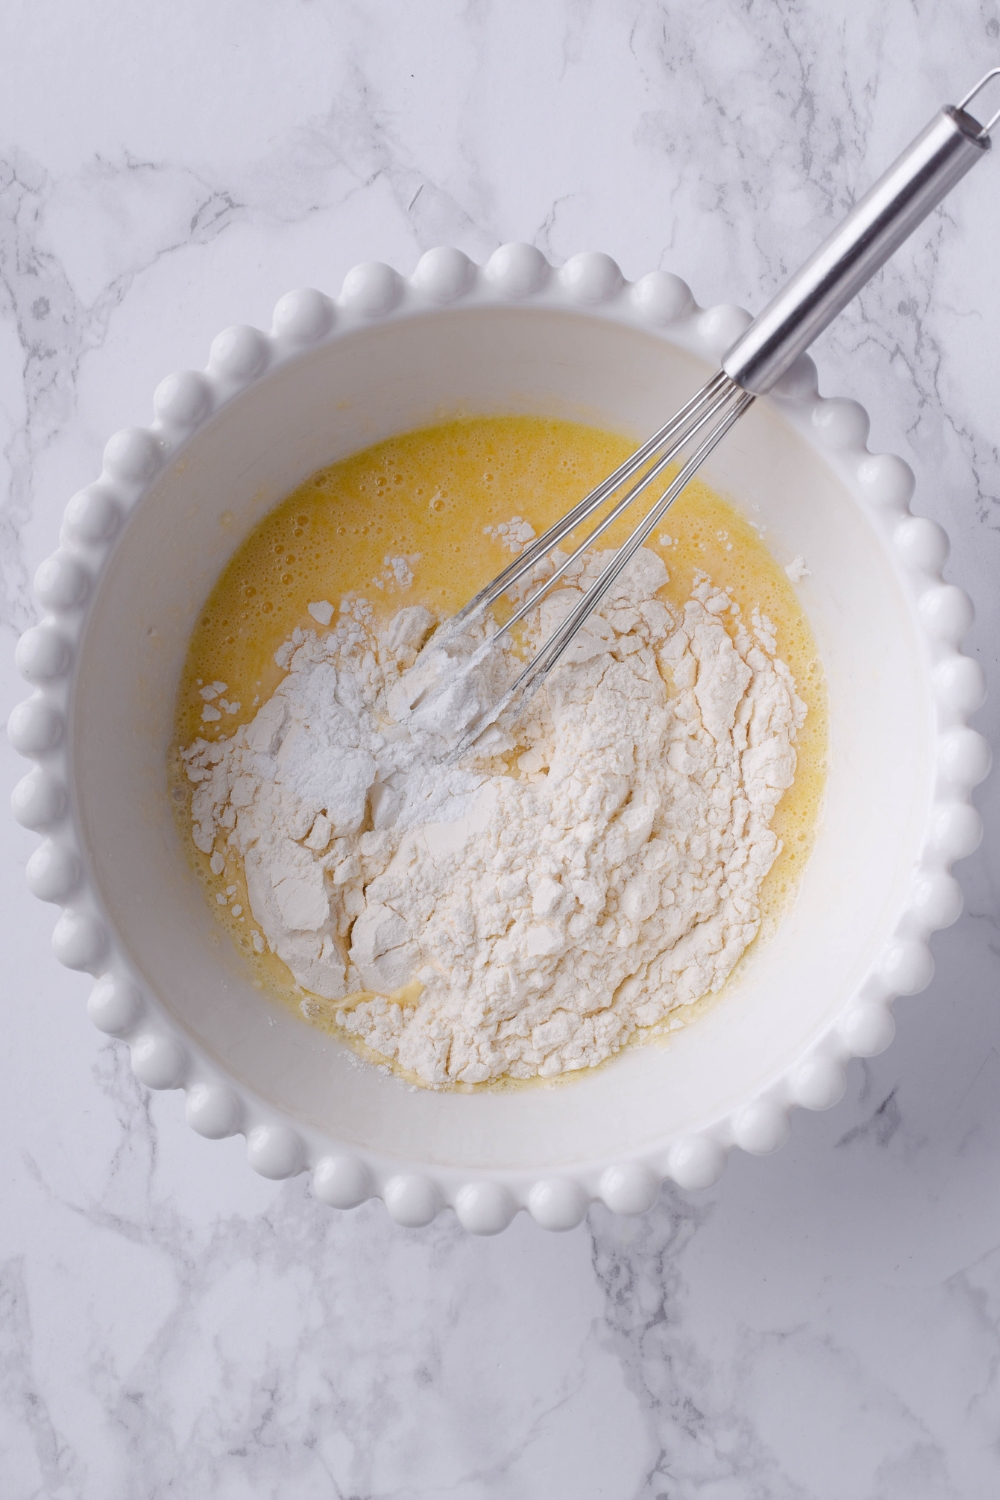 A mixing bowl with wet ingredients and dry ingredients added.